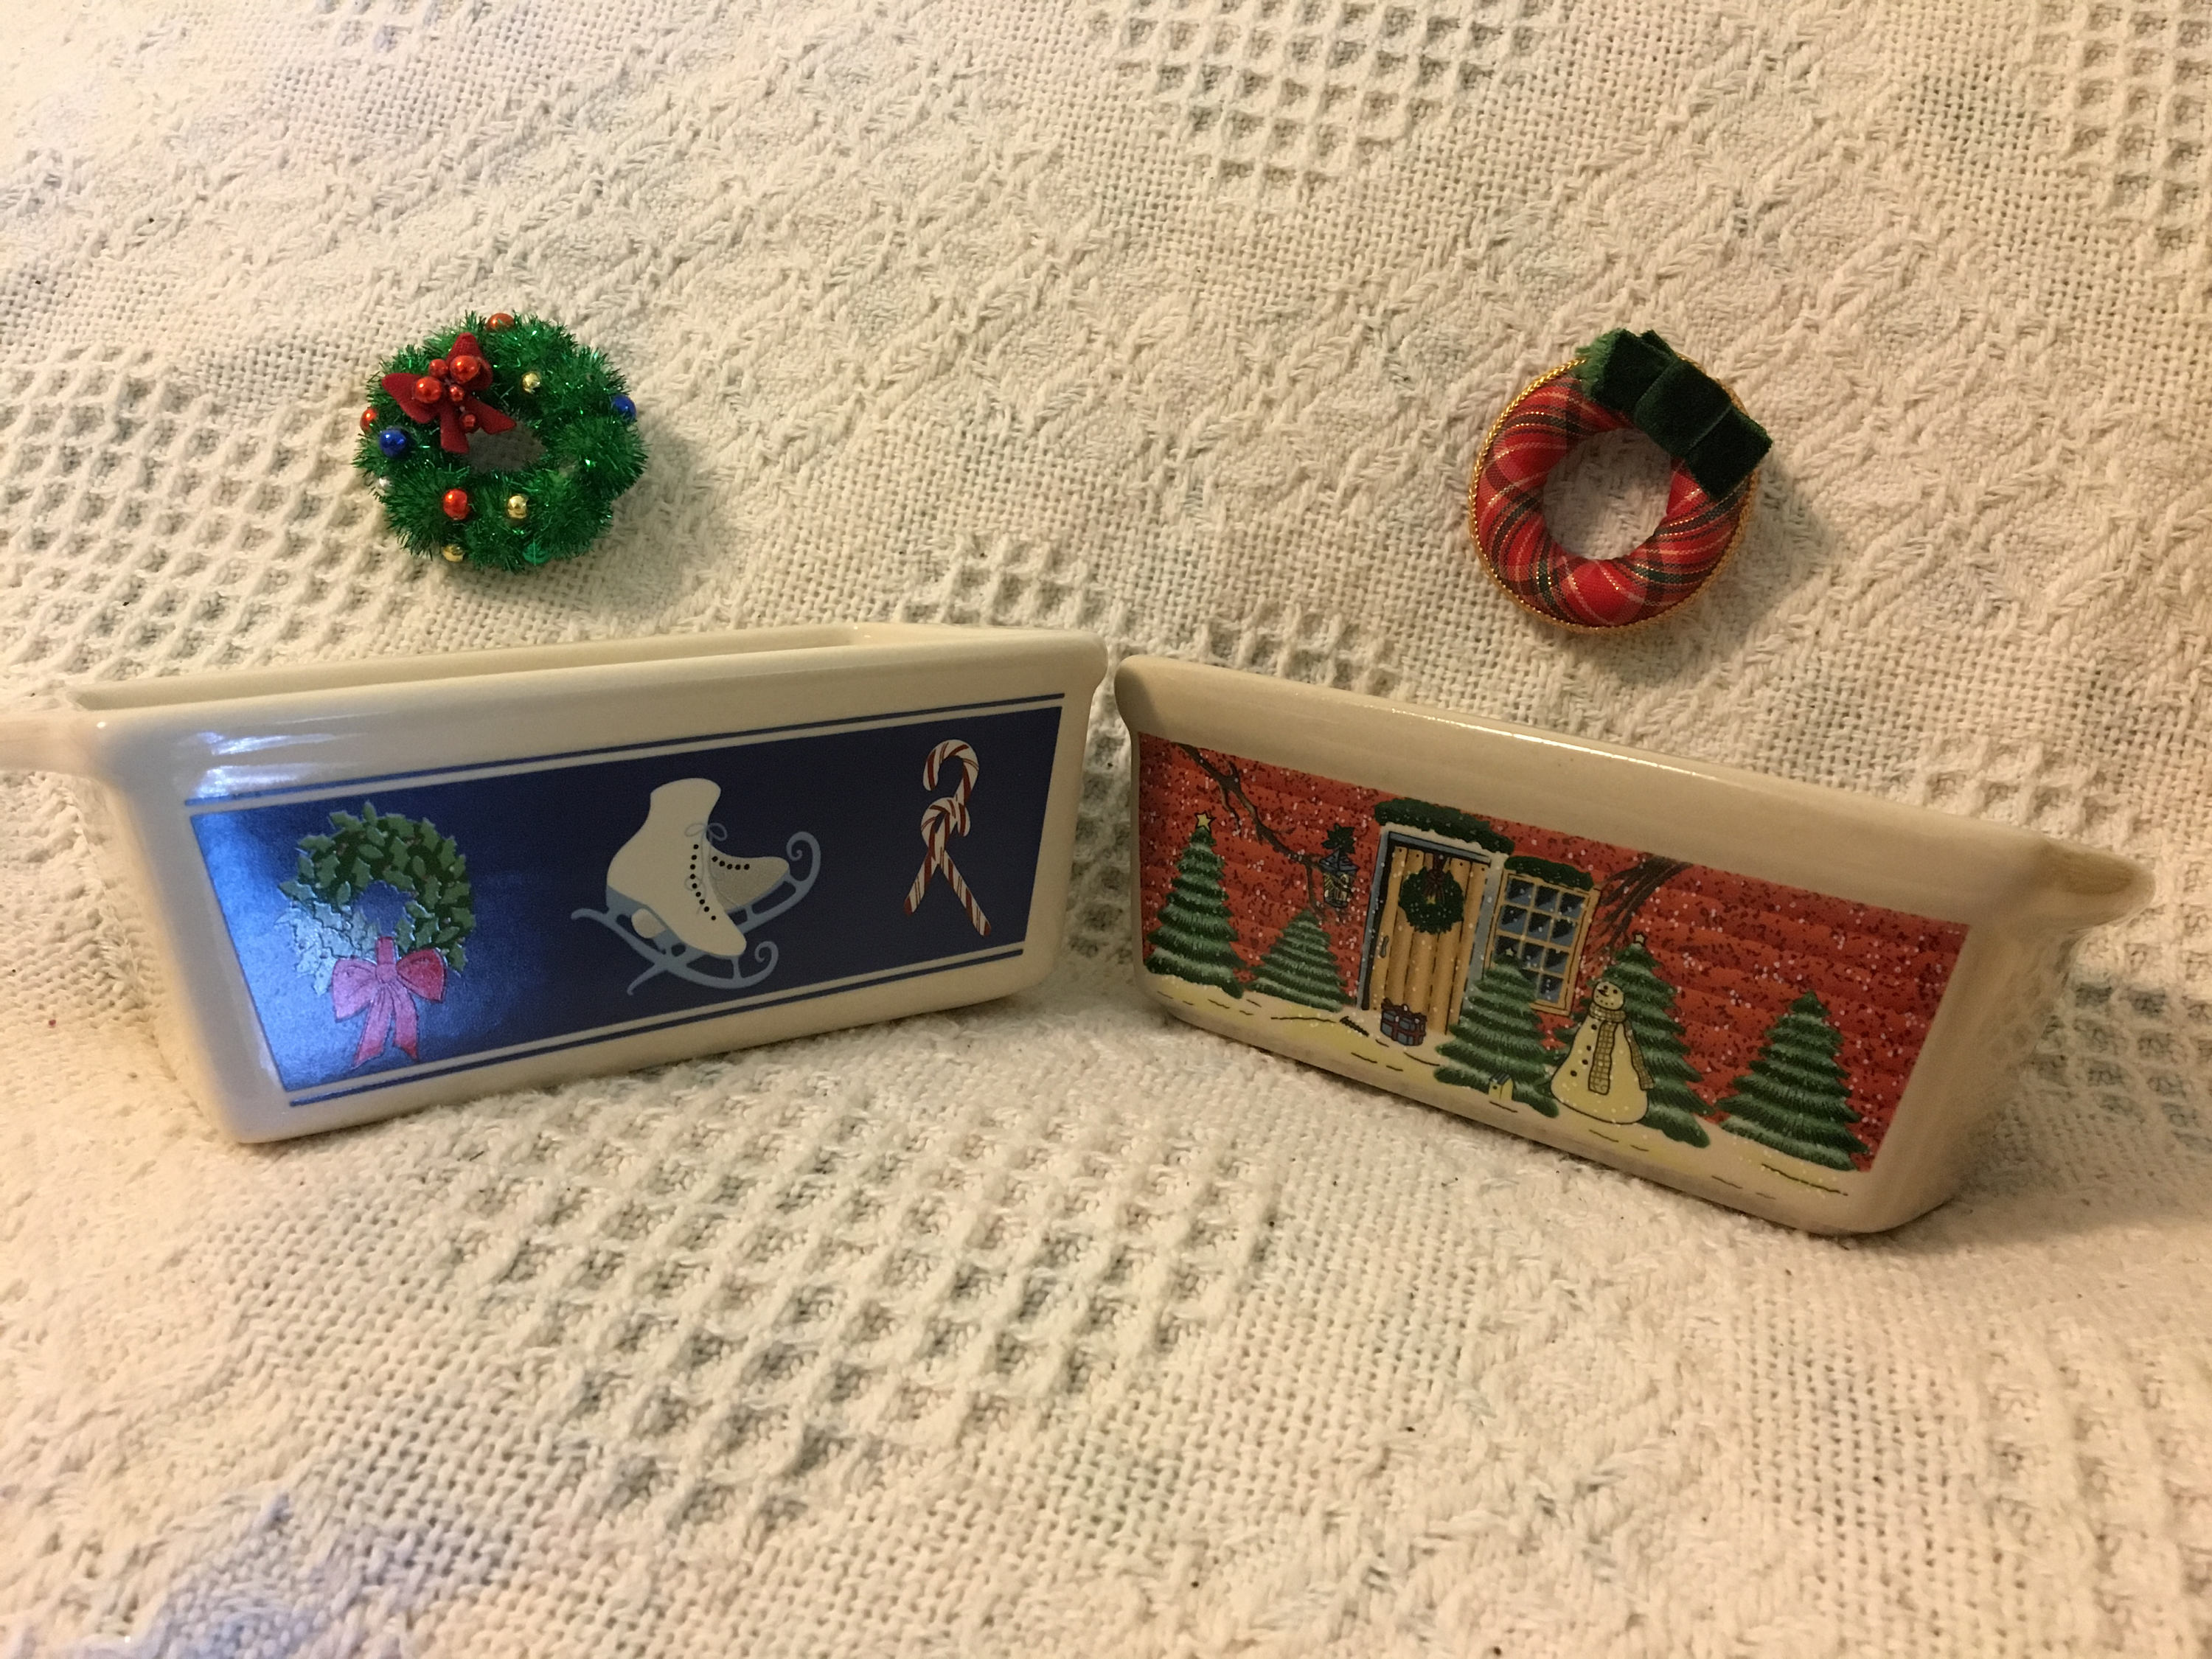 Vintage LTD Commodities White Ceramic Mini Loaf Baking Pan in Christmas  Theme. Set of 2 Mini Loaf Pans -  Finland